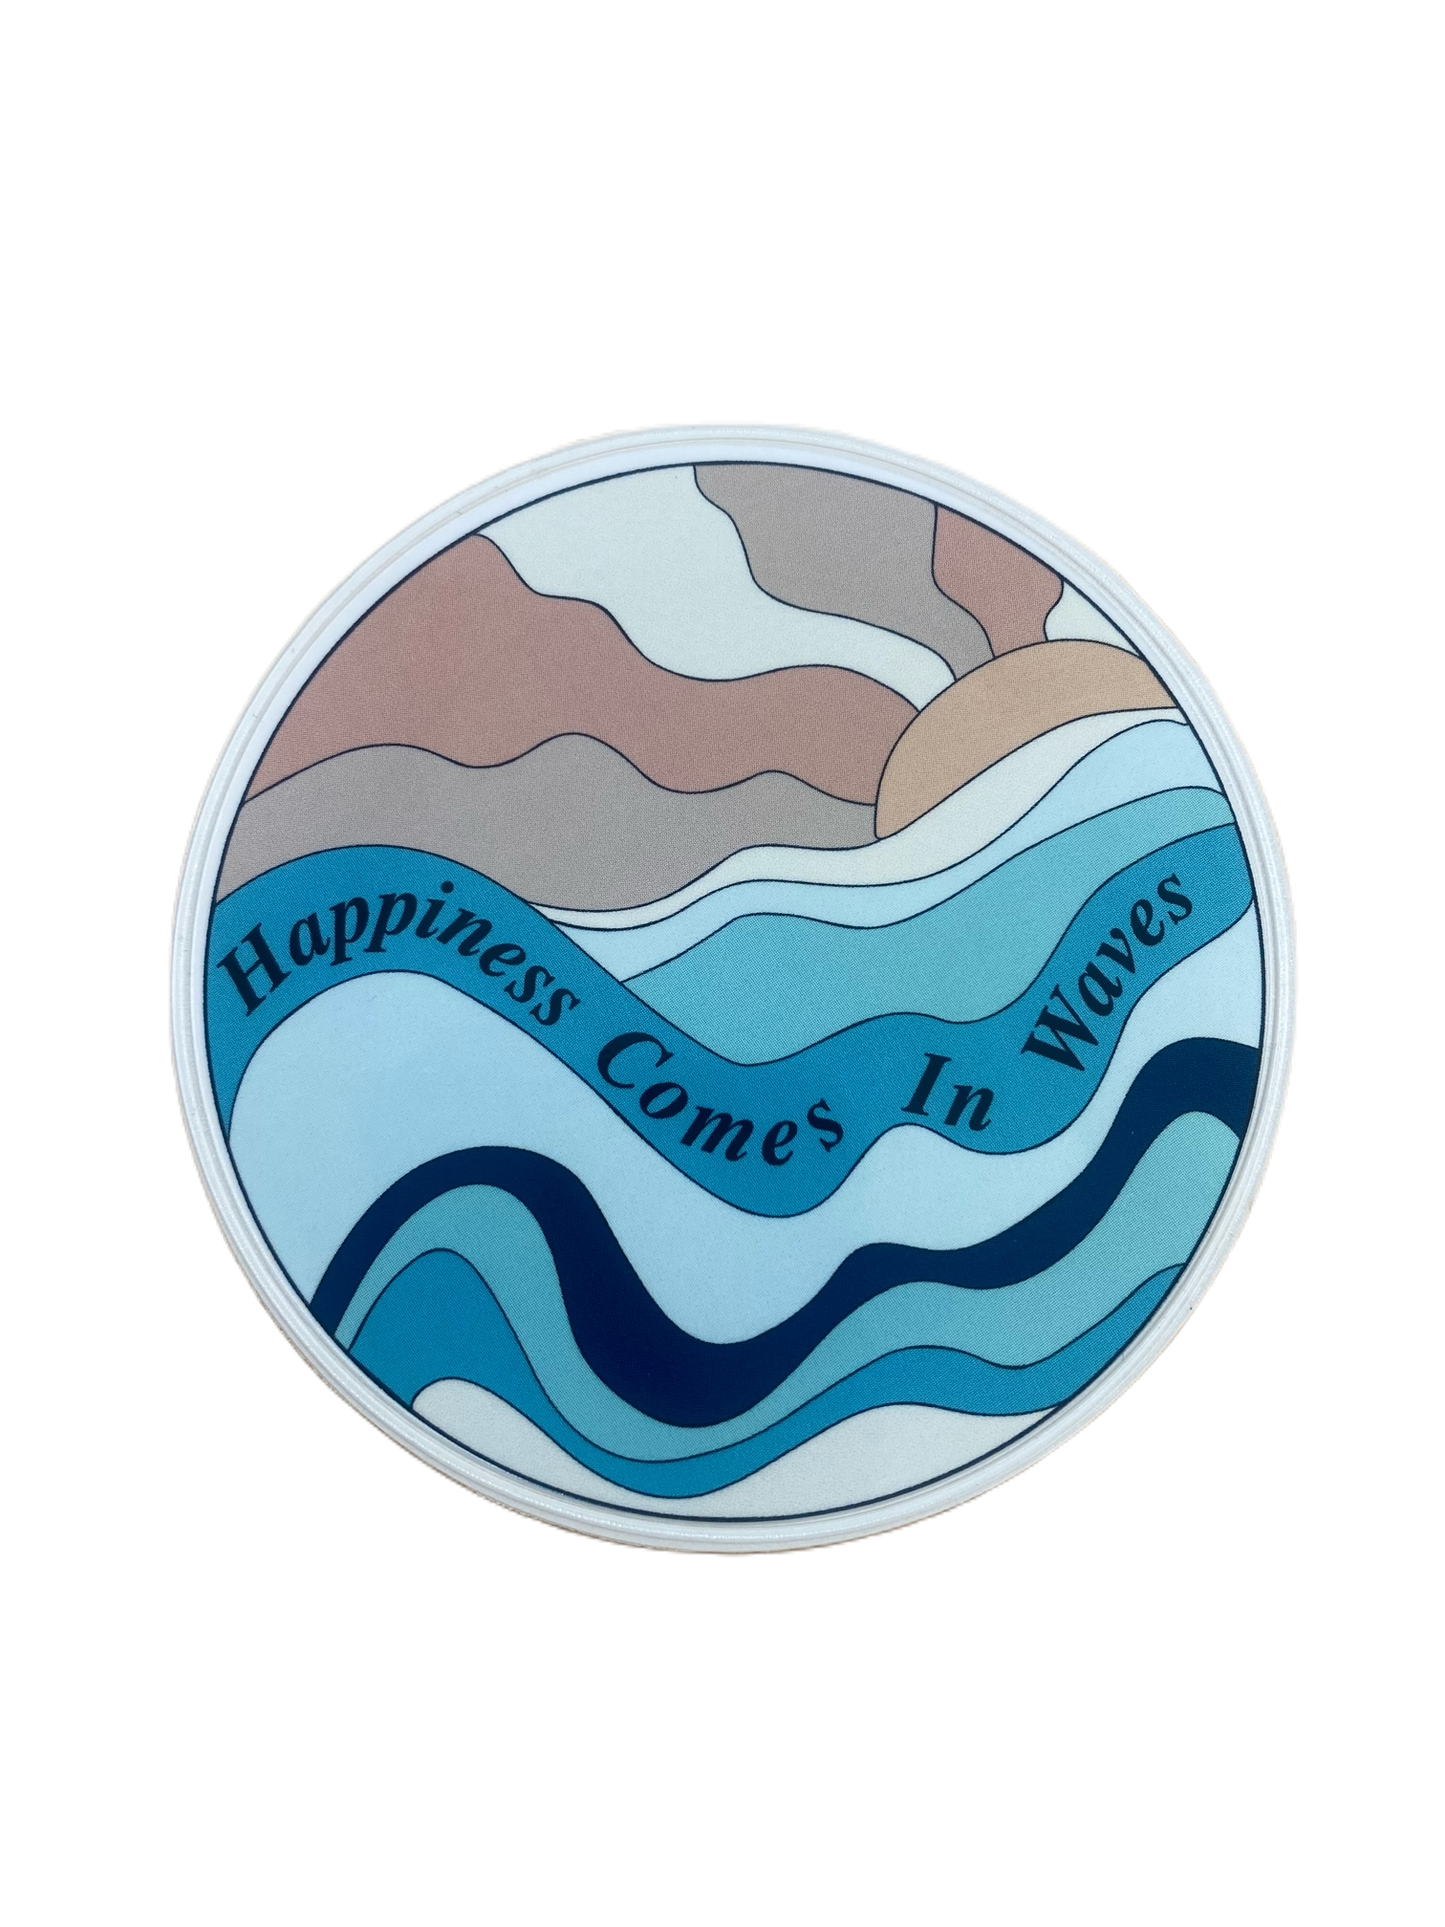 The Cove Exclusive Sticker "Happiness Comes in Waves"